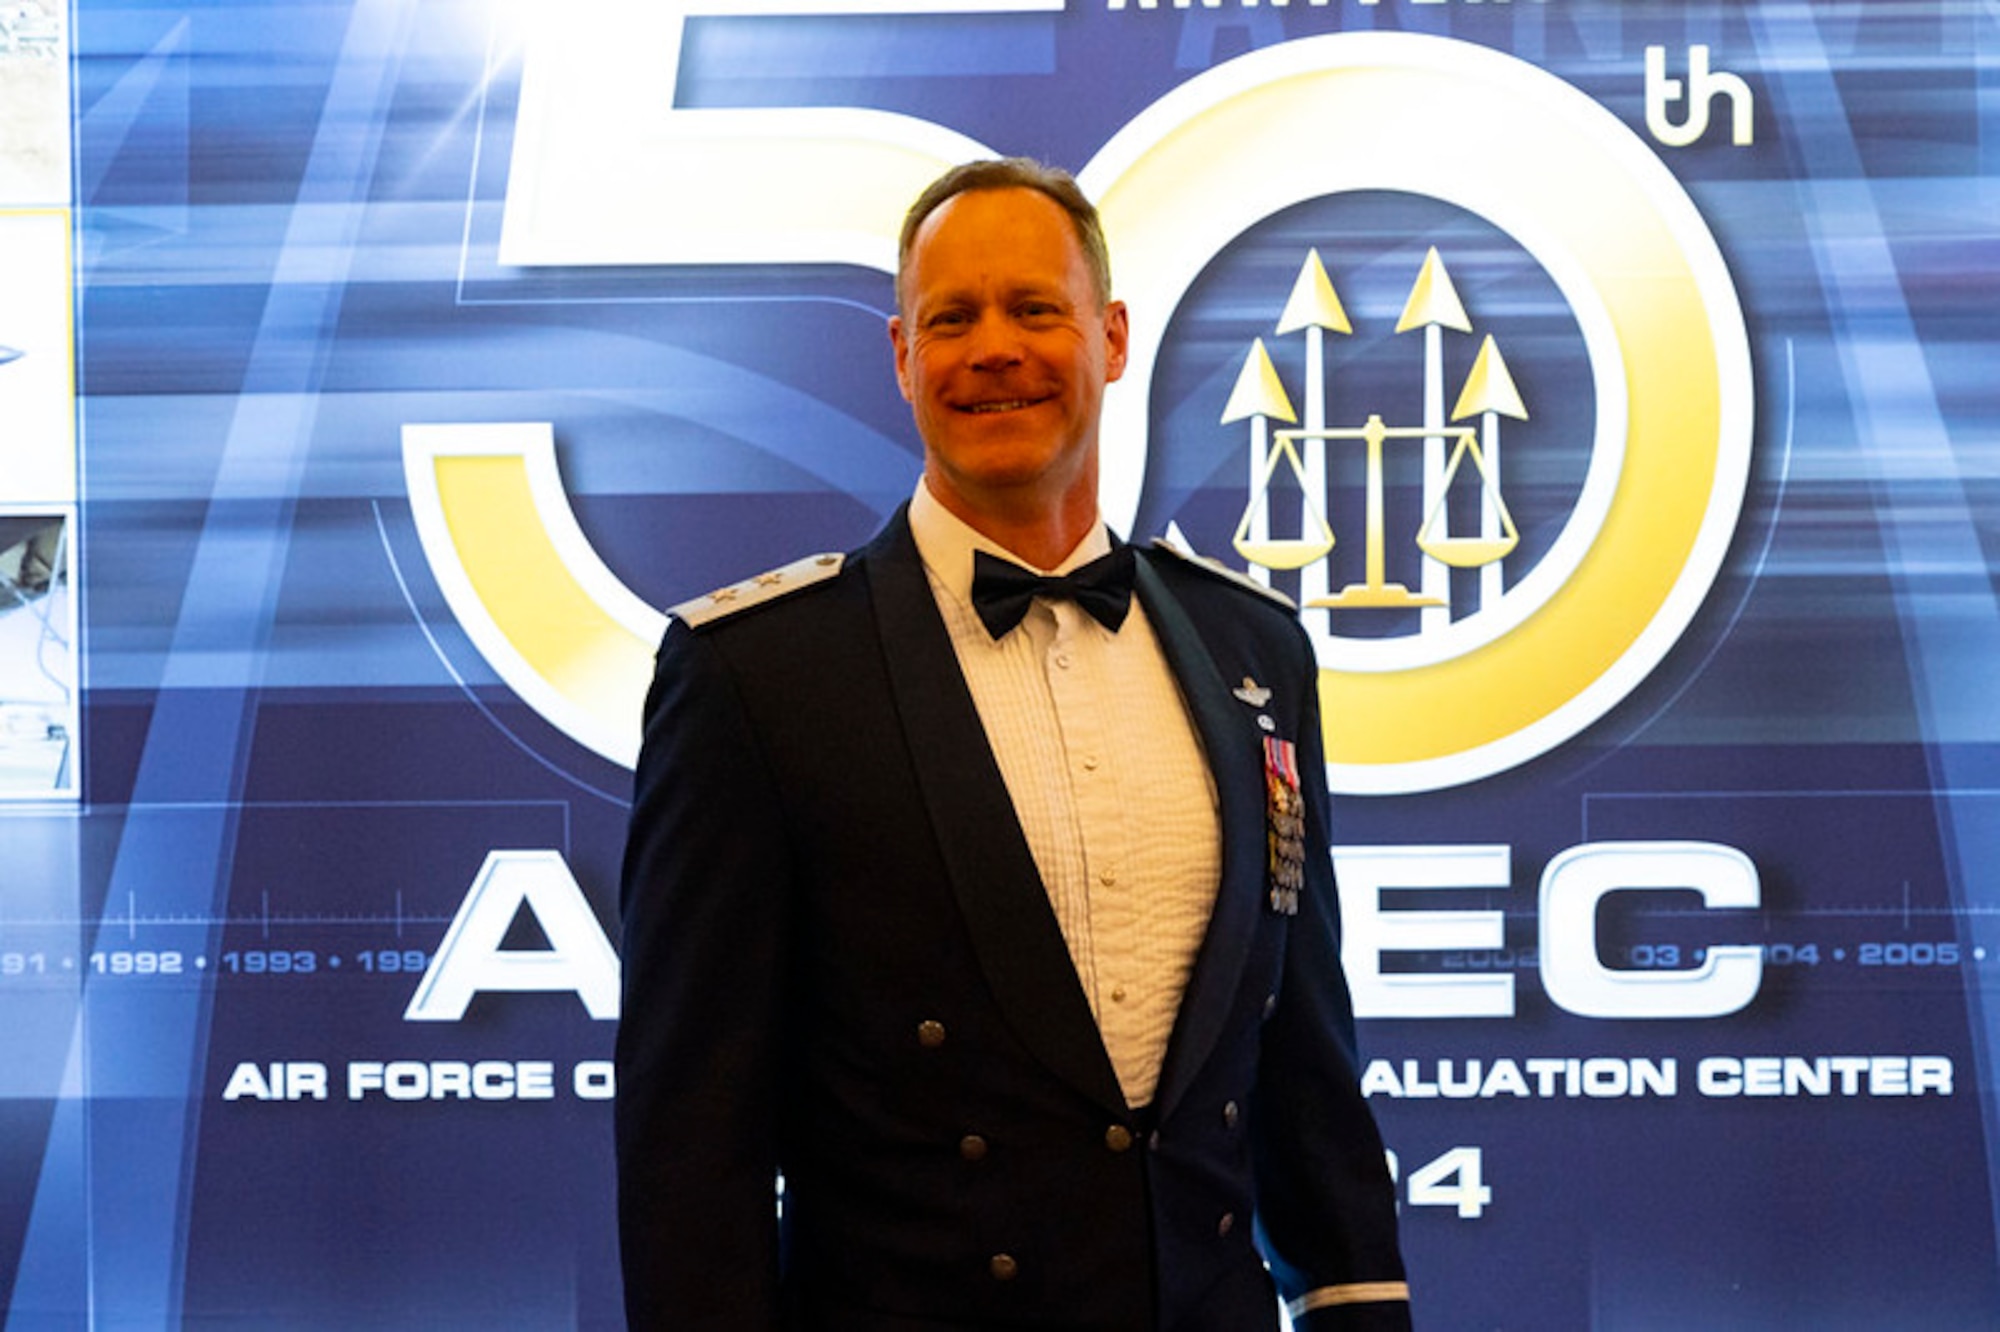 Maj. Gen. James R. Sears, Jr., Deputy Commander for Air Education and Training Command attends the Air Force Operational Test and Evaluation Center 50th Anniversary Celebration held at the Sandia Resort in Albuquerque, N.M., on March 6, 2024. General Sears was the AFOTEC Commander from April 2020 to July 2022.